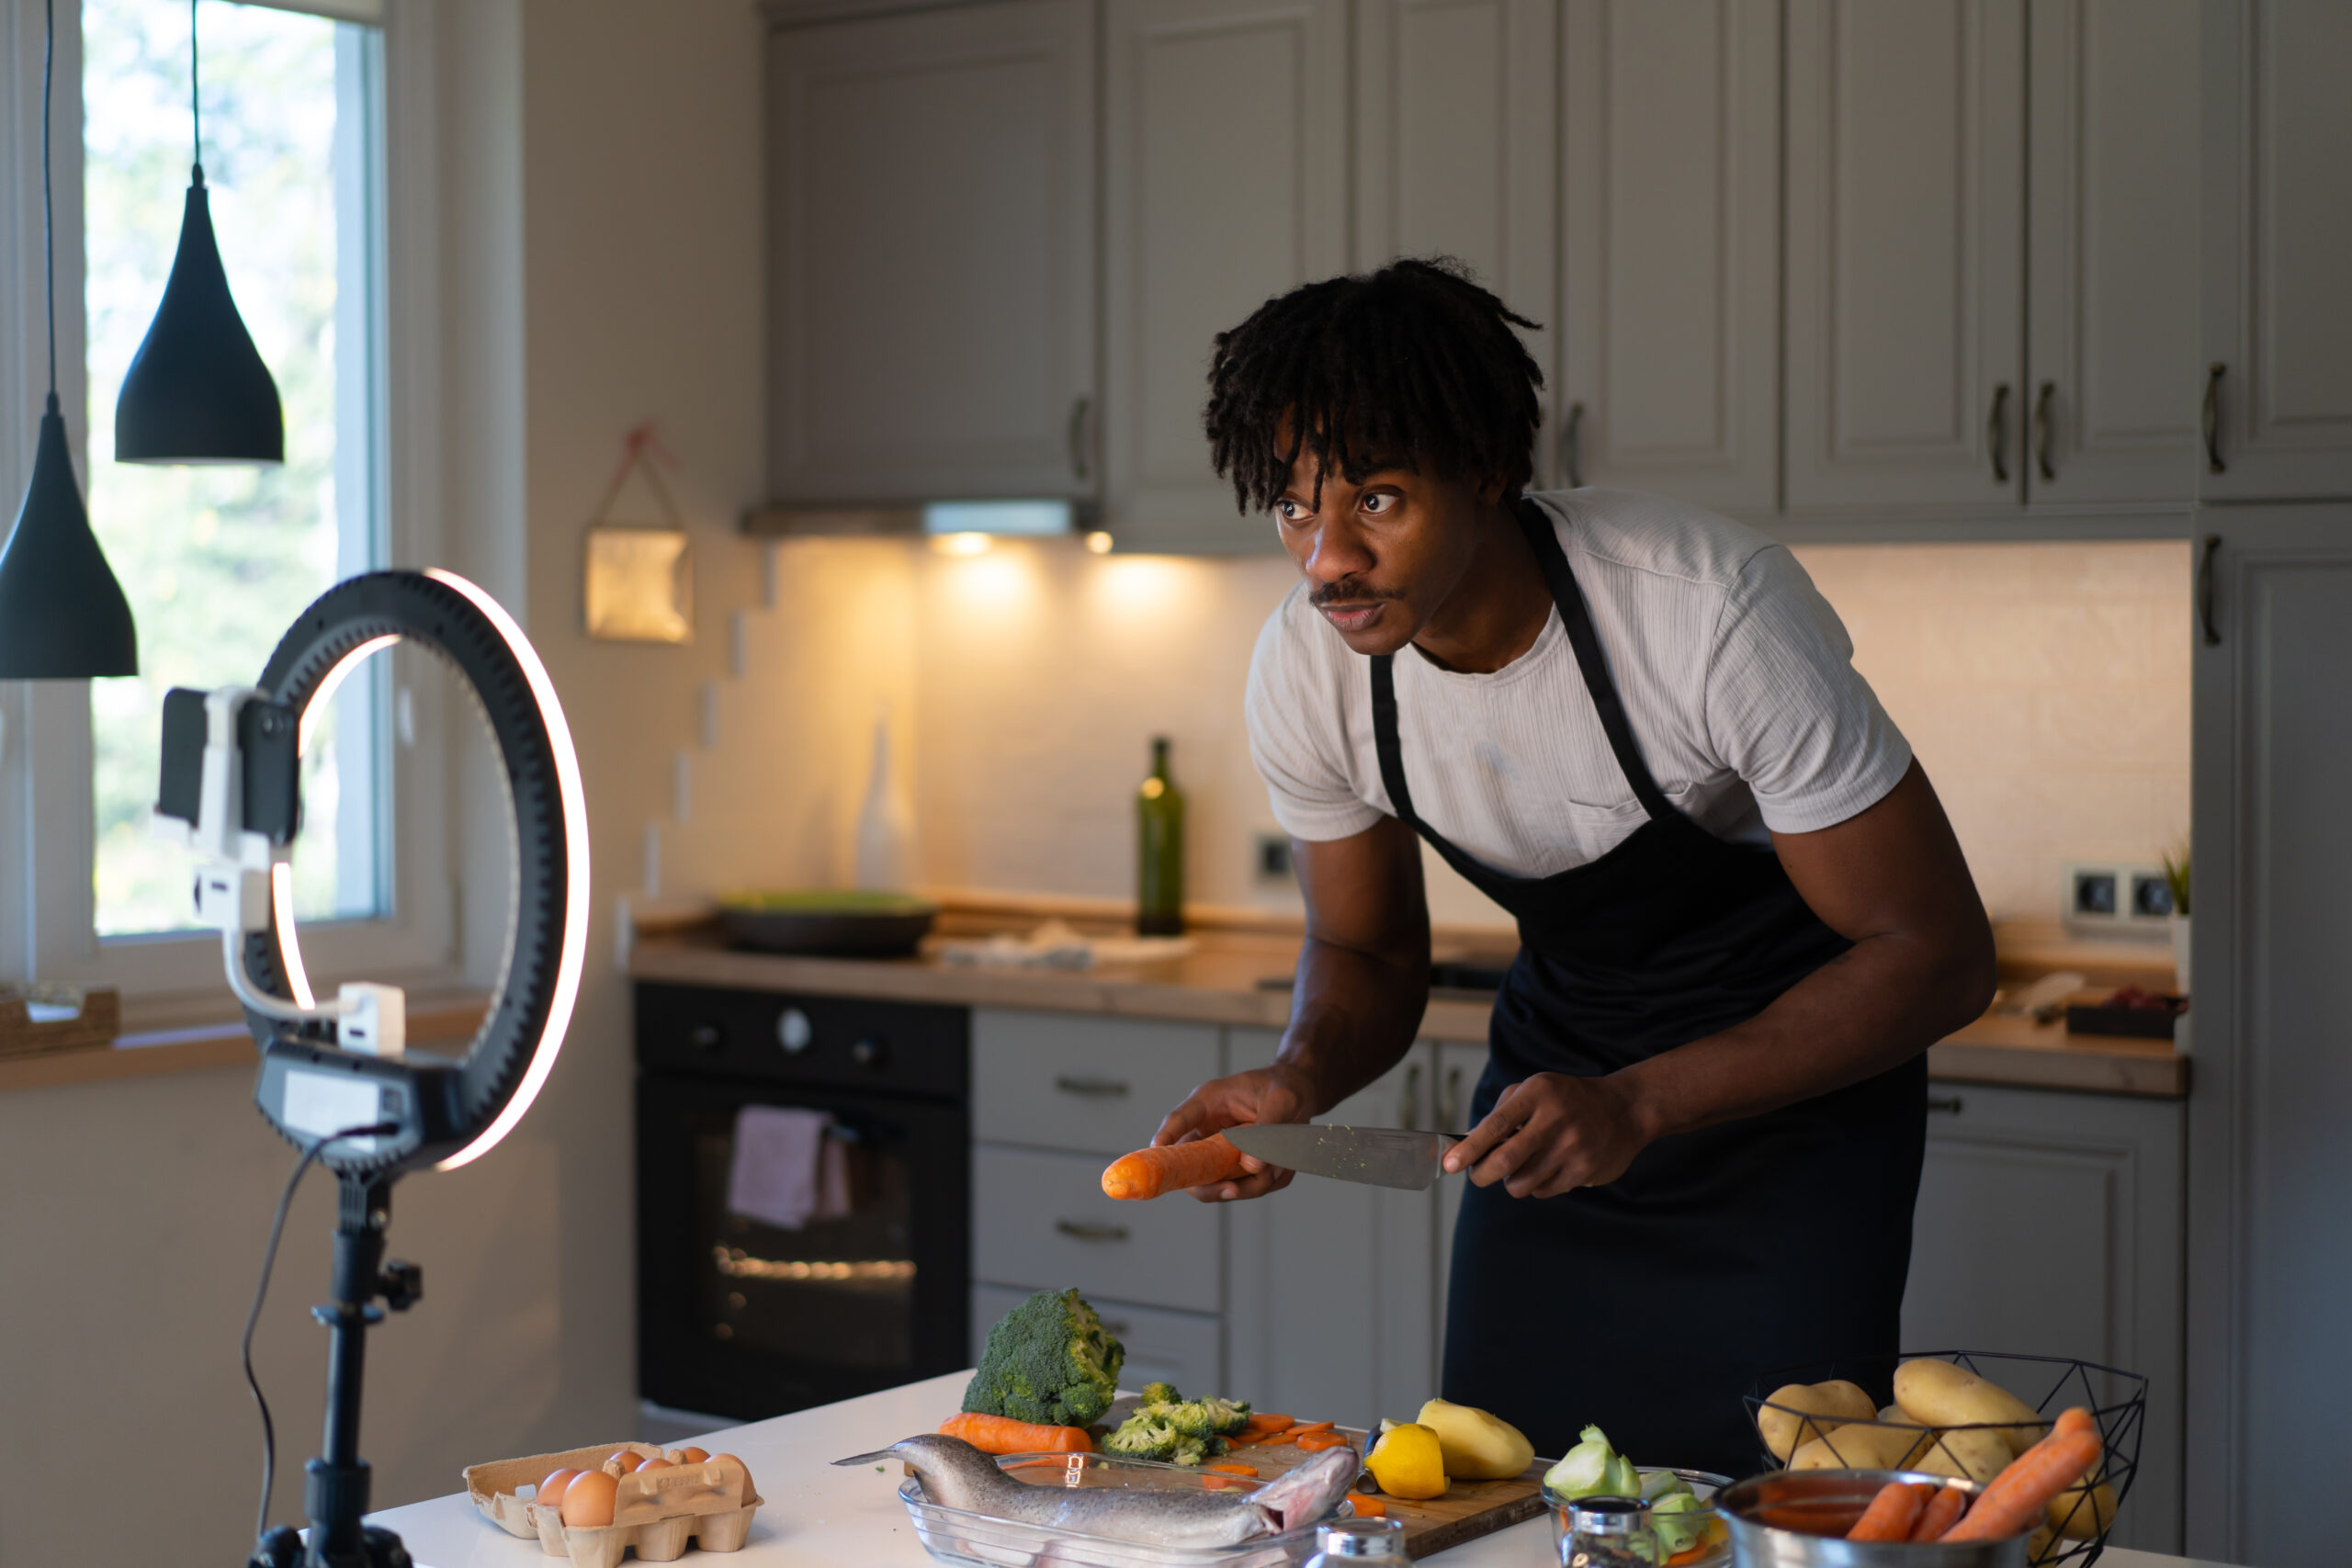 LED ring lamp supporting a mobile phone to record a live streaming event on cooking, an African-American man showing an easy healthy meal from his kitchen at home